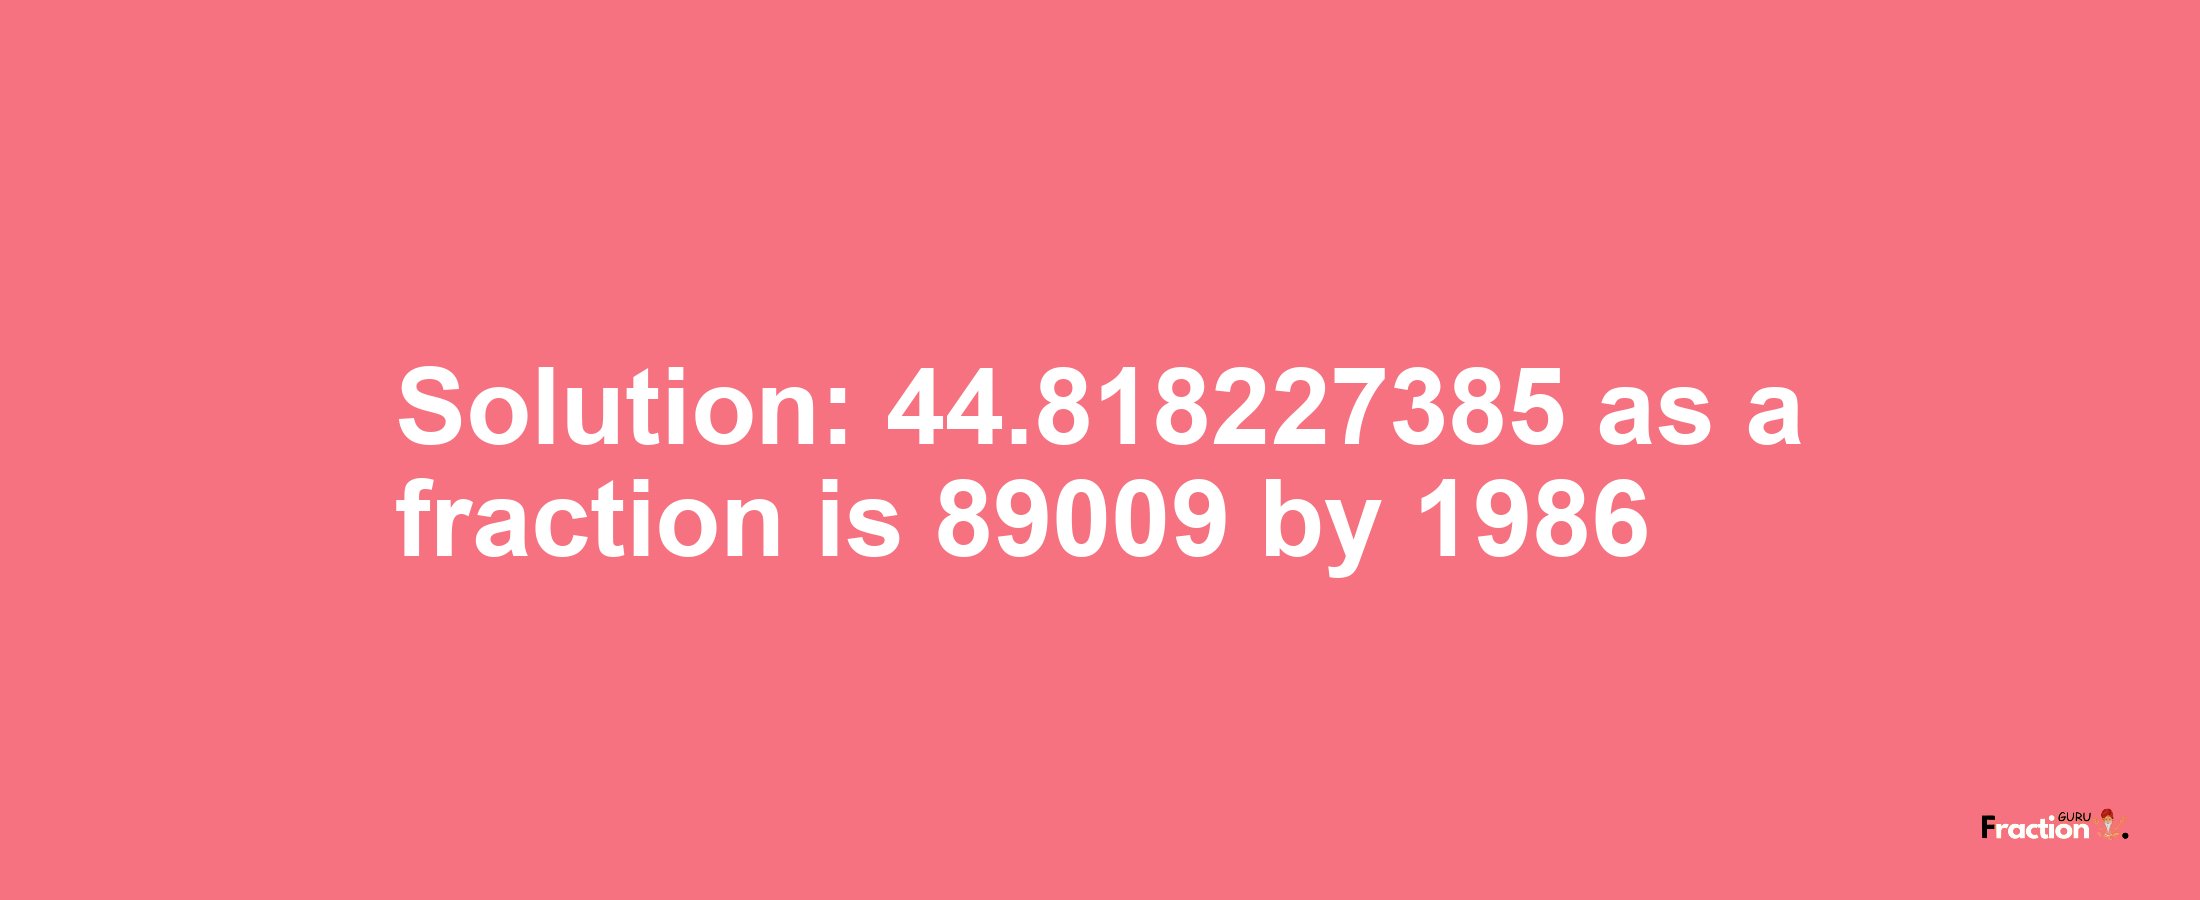 Solution:44.818227385 as a fraction is 89009/1986